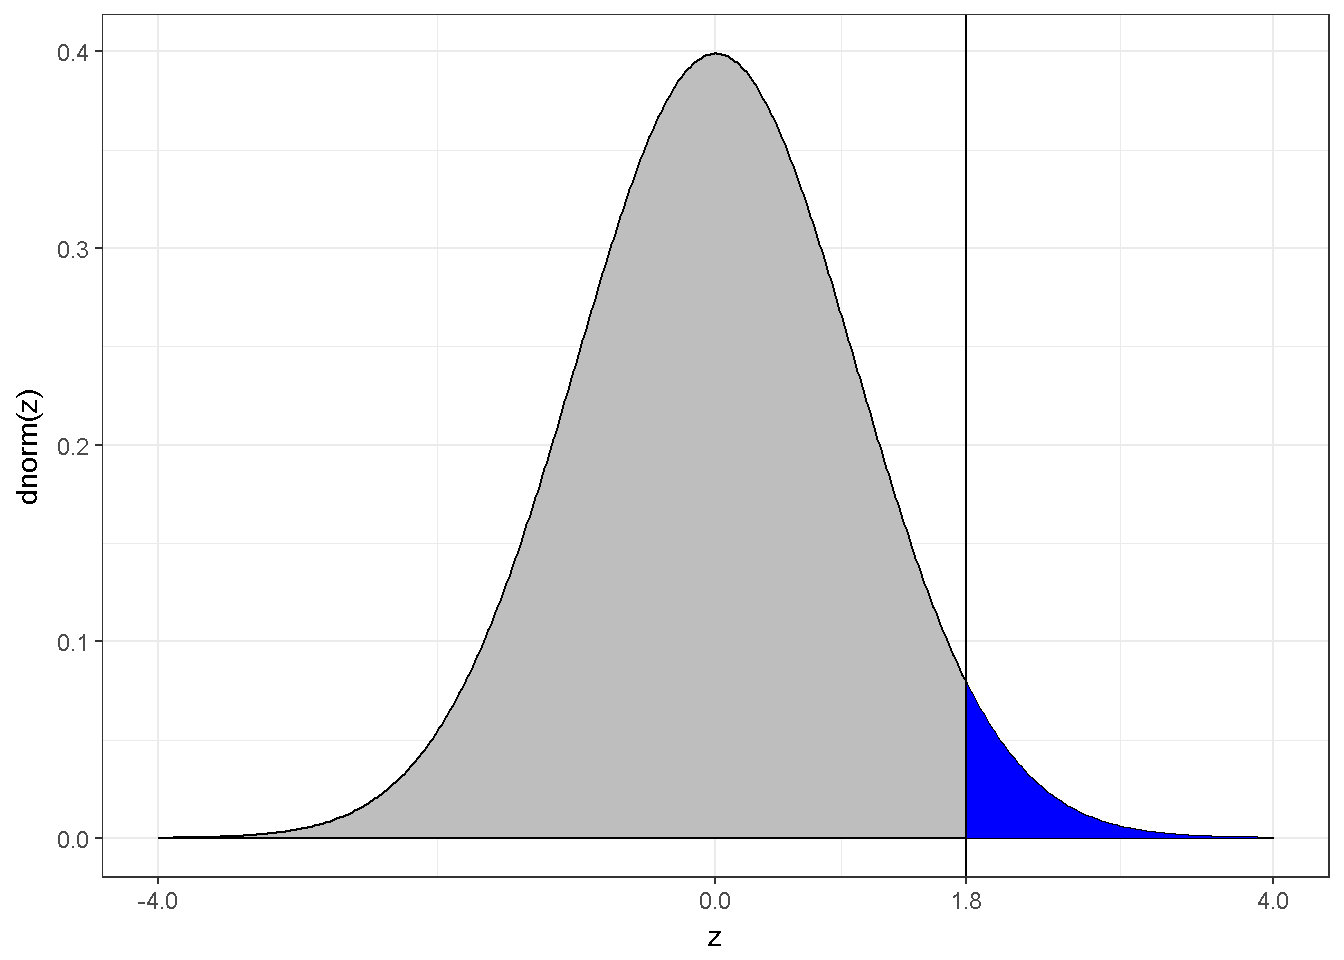 The z distribution and z=1.8